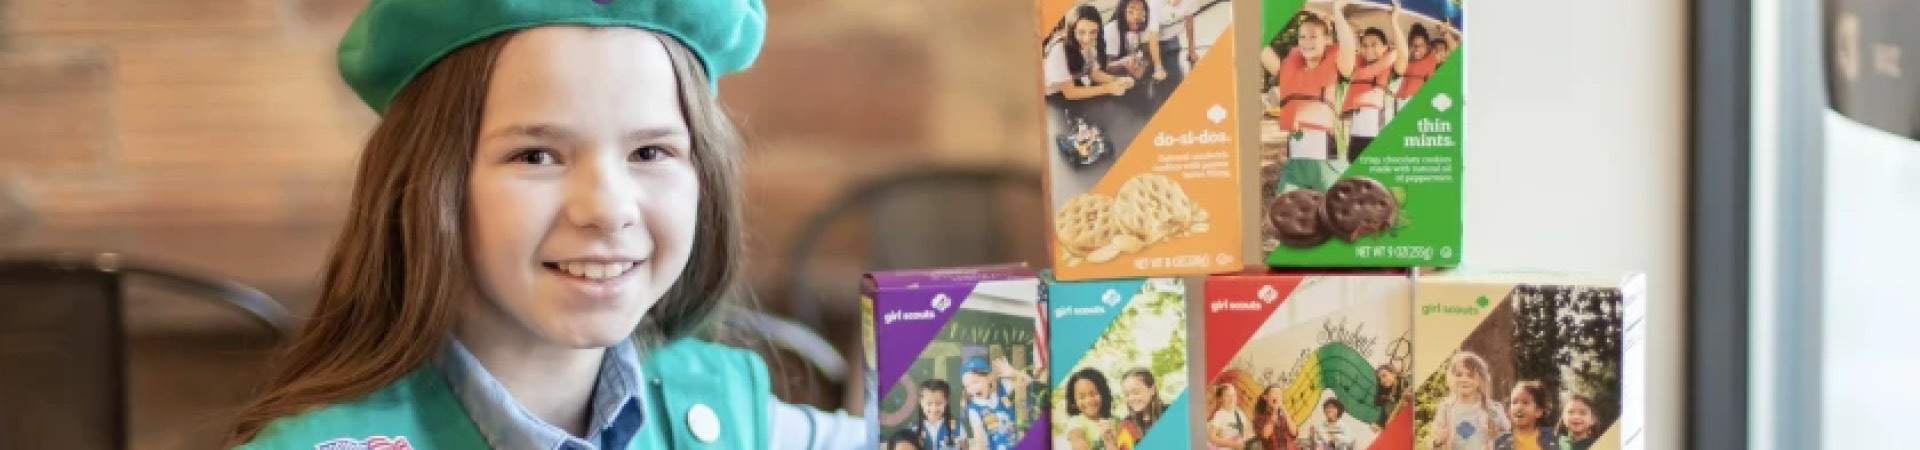  girl scout ellisyn sitting at a table with boxes of girl scout cookies 